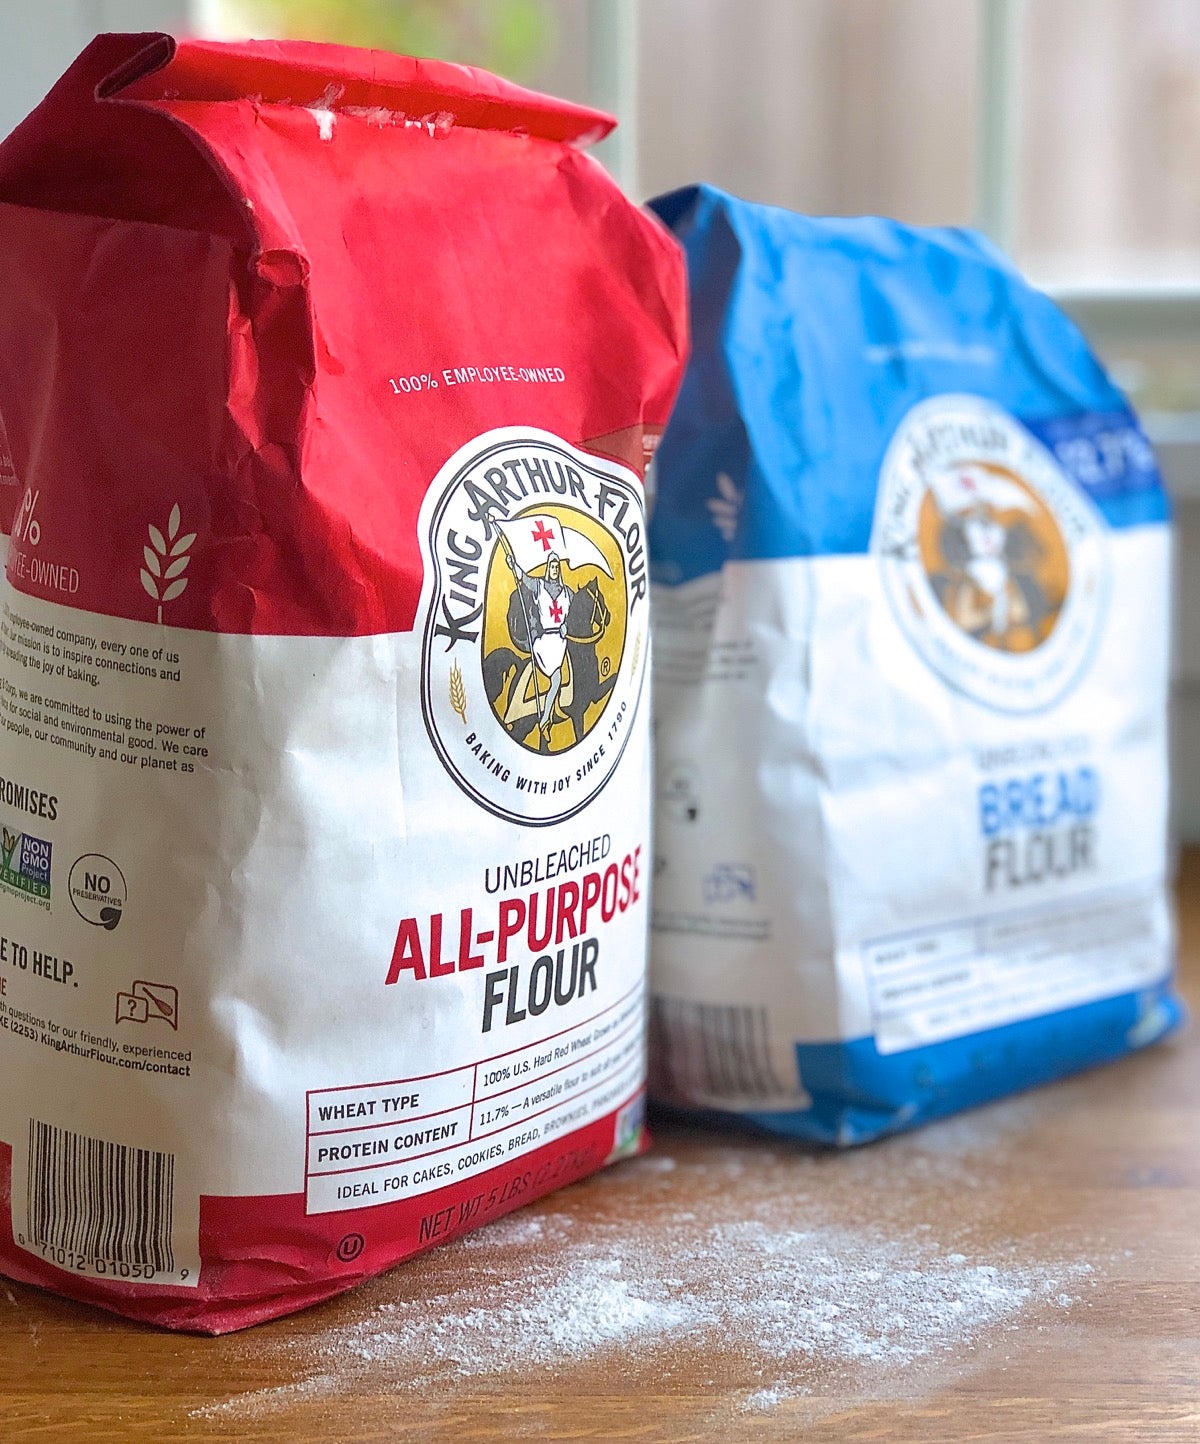 Bags of King Arthur all-purpose flour and bread flour on a table.